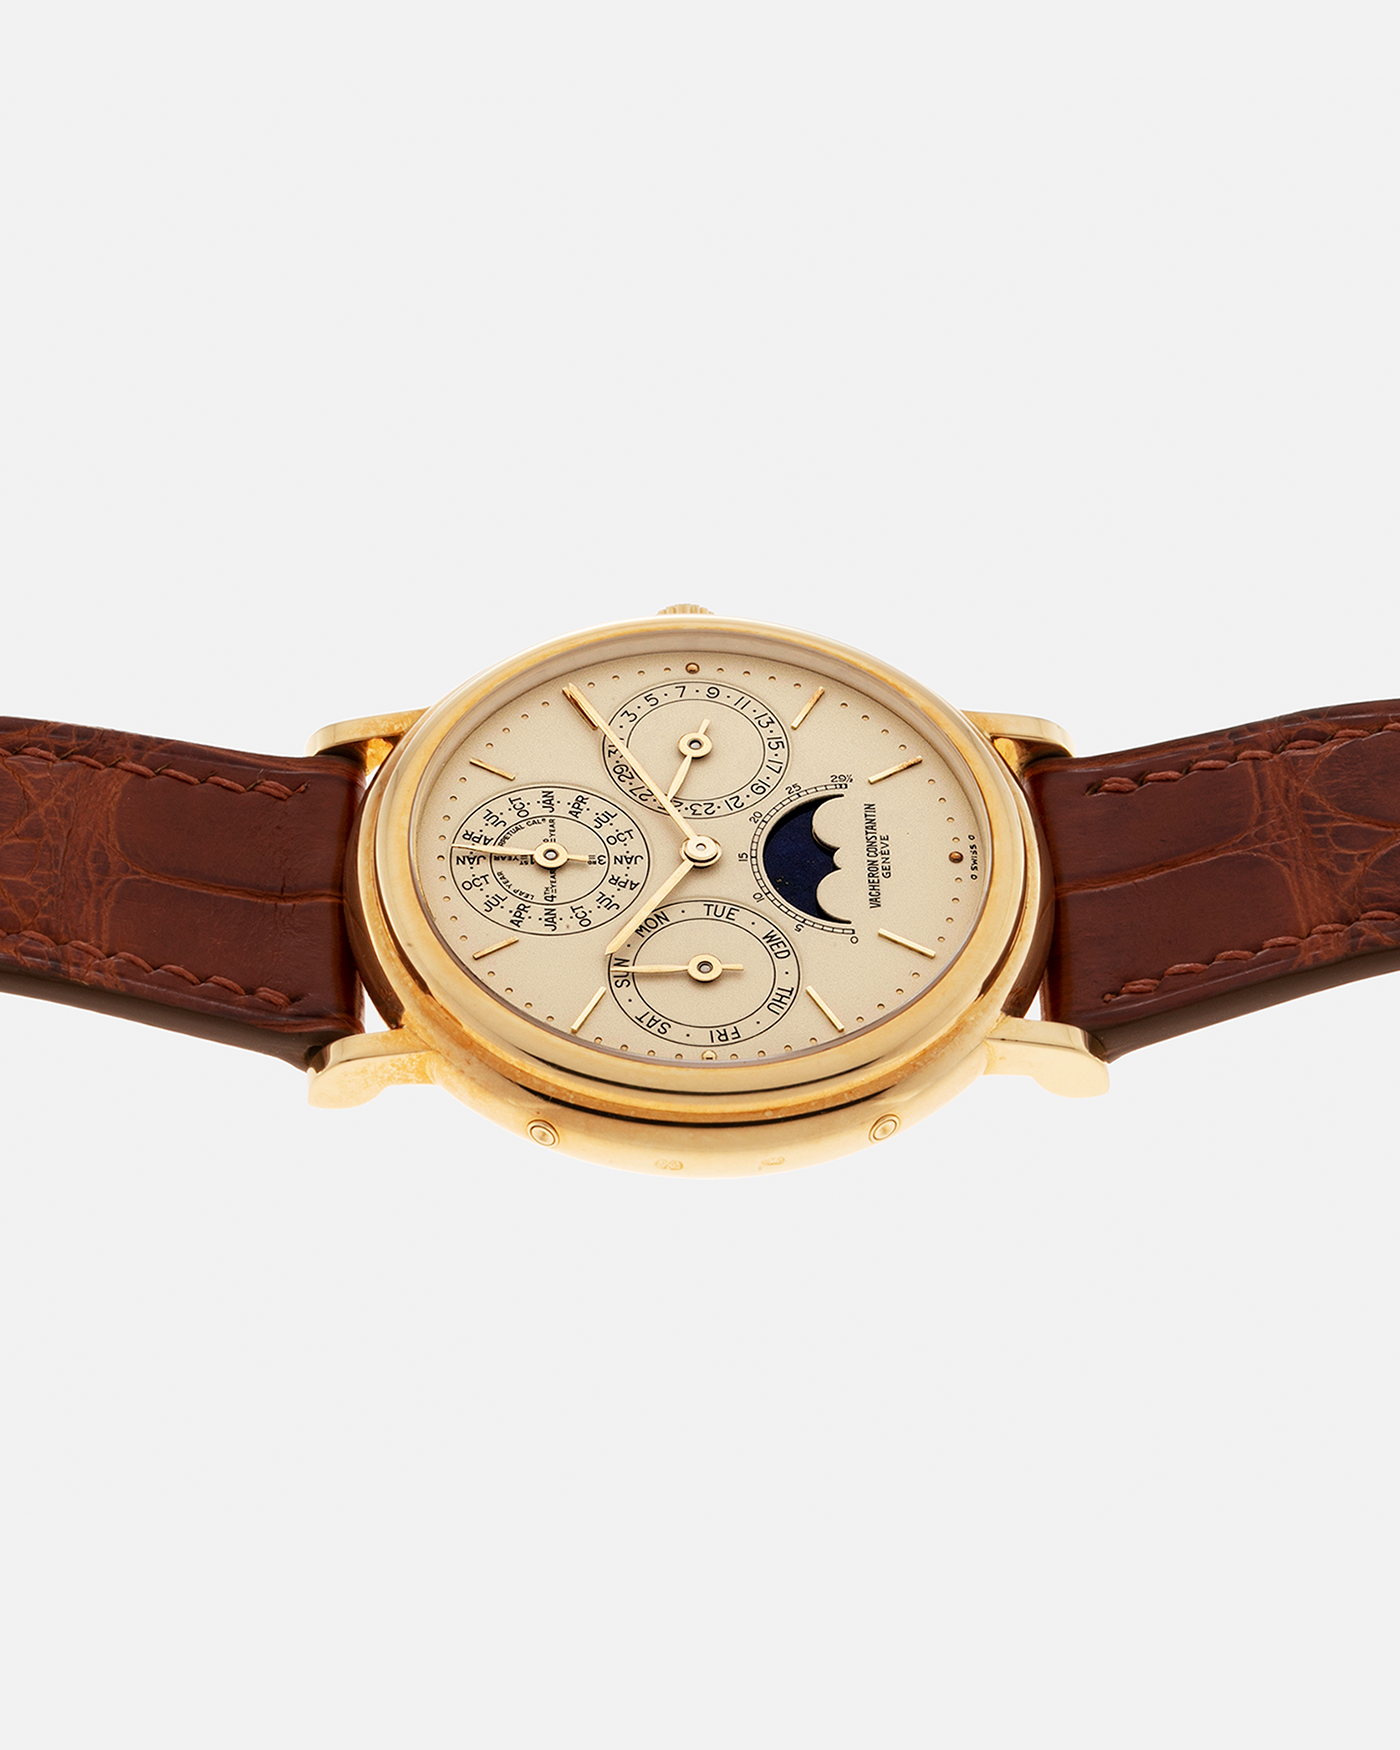 Brand: Vacheron Constantin Year: 1990’s Model: Perpetual Calendar Reference Number: 43031 Material: 18-carat Yellow Gold Movement: Vacheron Constantin Cal. 1120/2 (based on JLC Cal. 920), Self-Winding Case Diameter: 36mm Bracelet: Generic Brown Crocodile Leather Strap with Signed 18-carat Yellow Gold Deployant Clasp